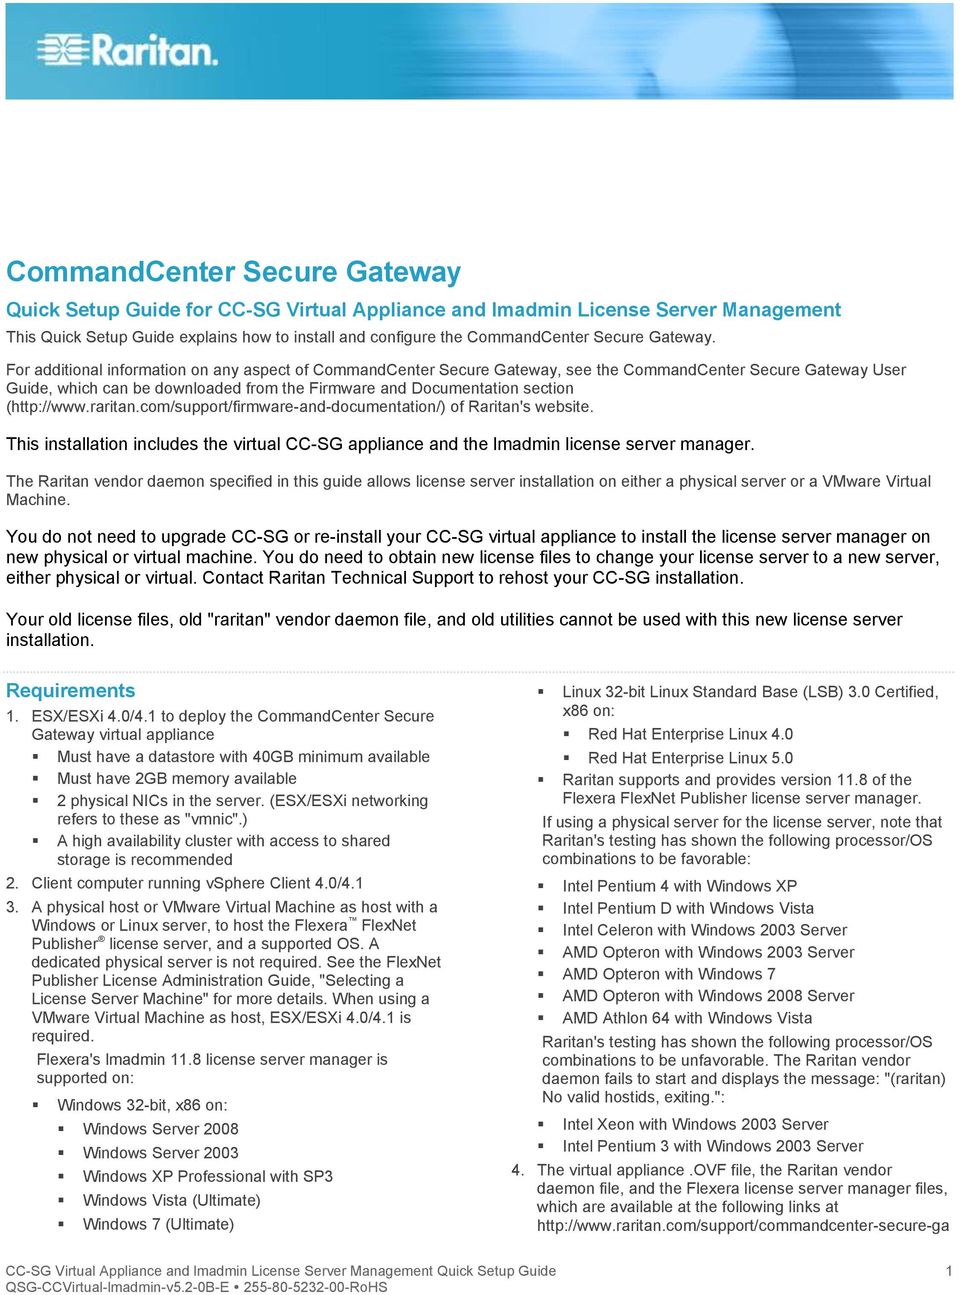 For additional information on any aspect of CommandCenter Secure Gateway, see the CommandCenter Secure Gateway User Guide, which can be downloaded from the Firmware and Documentation section